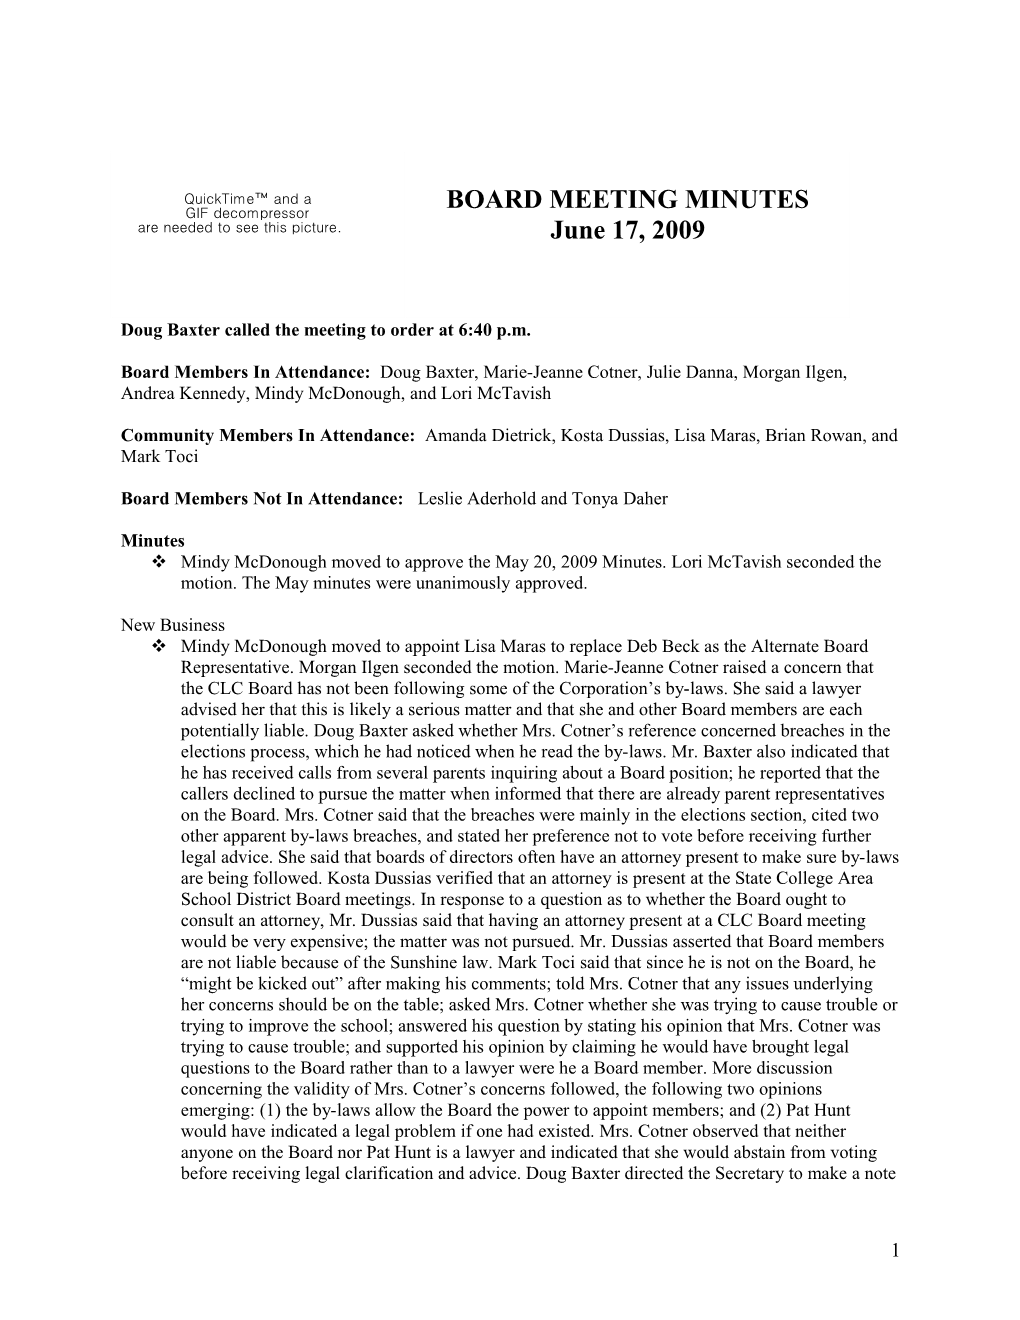 Board Meeting Minutes 12/12/07